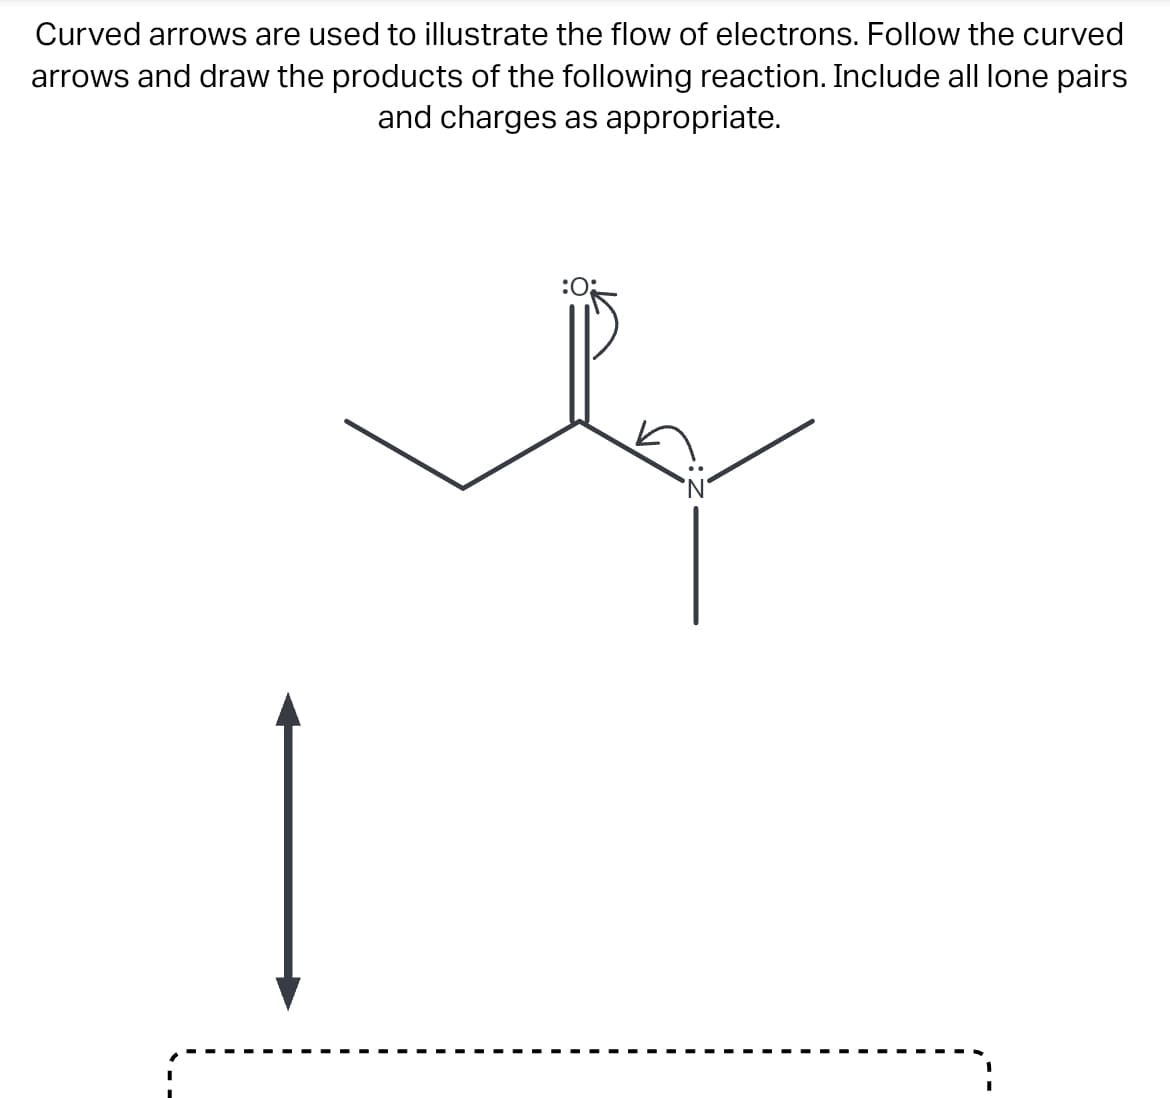 Curved arrows are used to illustrate the flow of electrons. Follow the curved
arrows and draw the products of the following reaction. Include all lone pairs
and charges as appropriate.
:0: